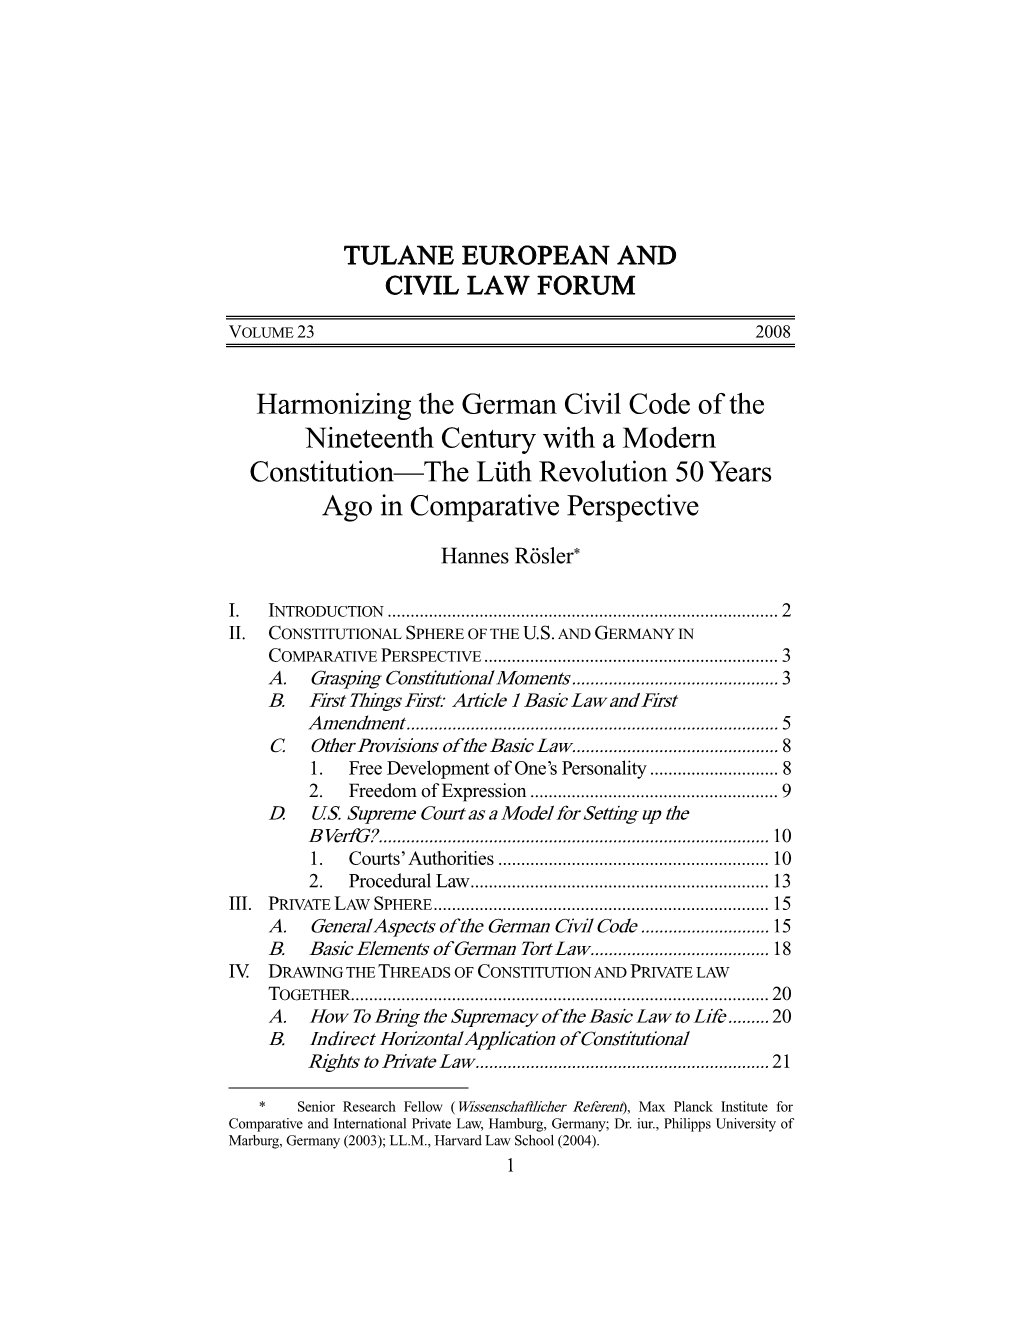 Harmonizing the German Civil Code of the Nineteenth Century with a Modern Constitution—The Lüth Revolution 50 Years Ago in Comparative Perspective